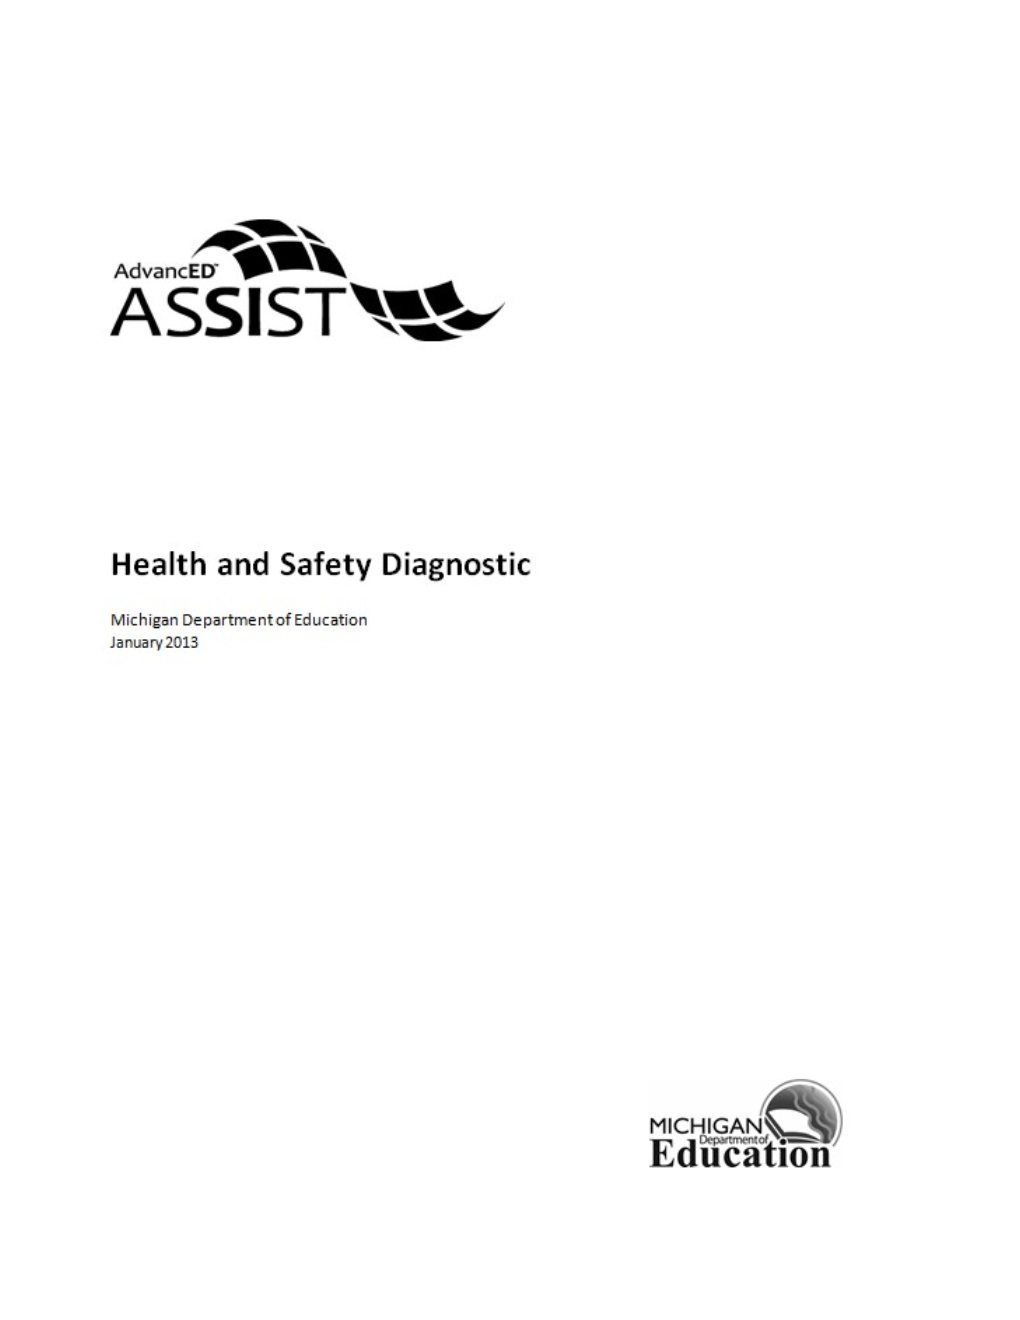 Health and Safety (HSAT) Diagnostic